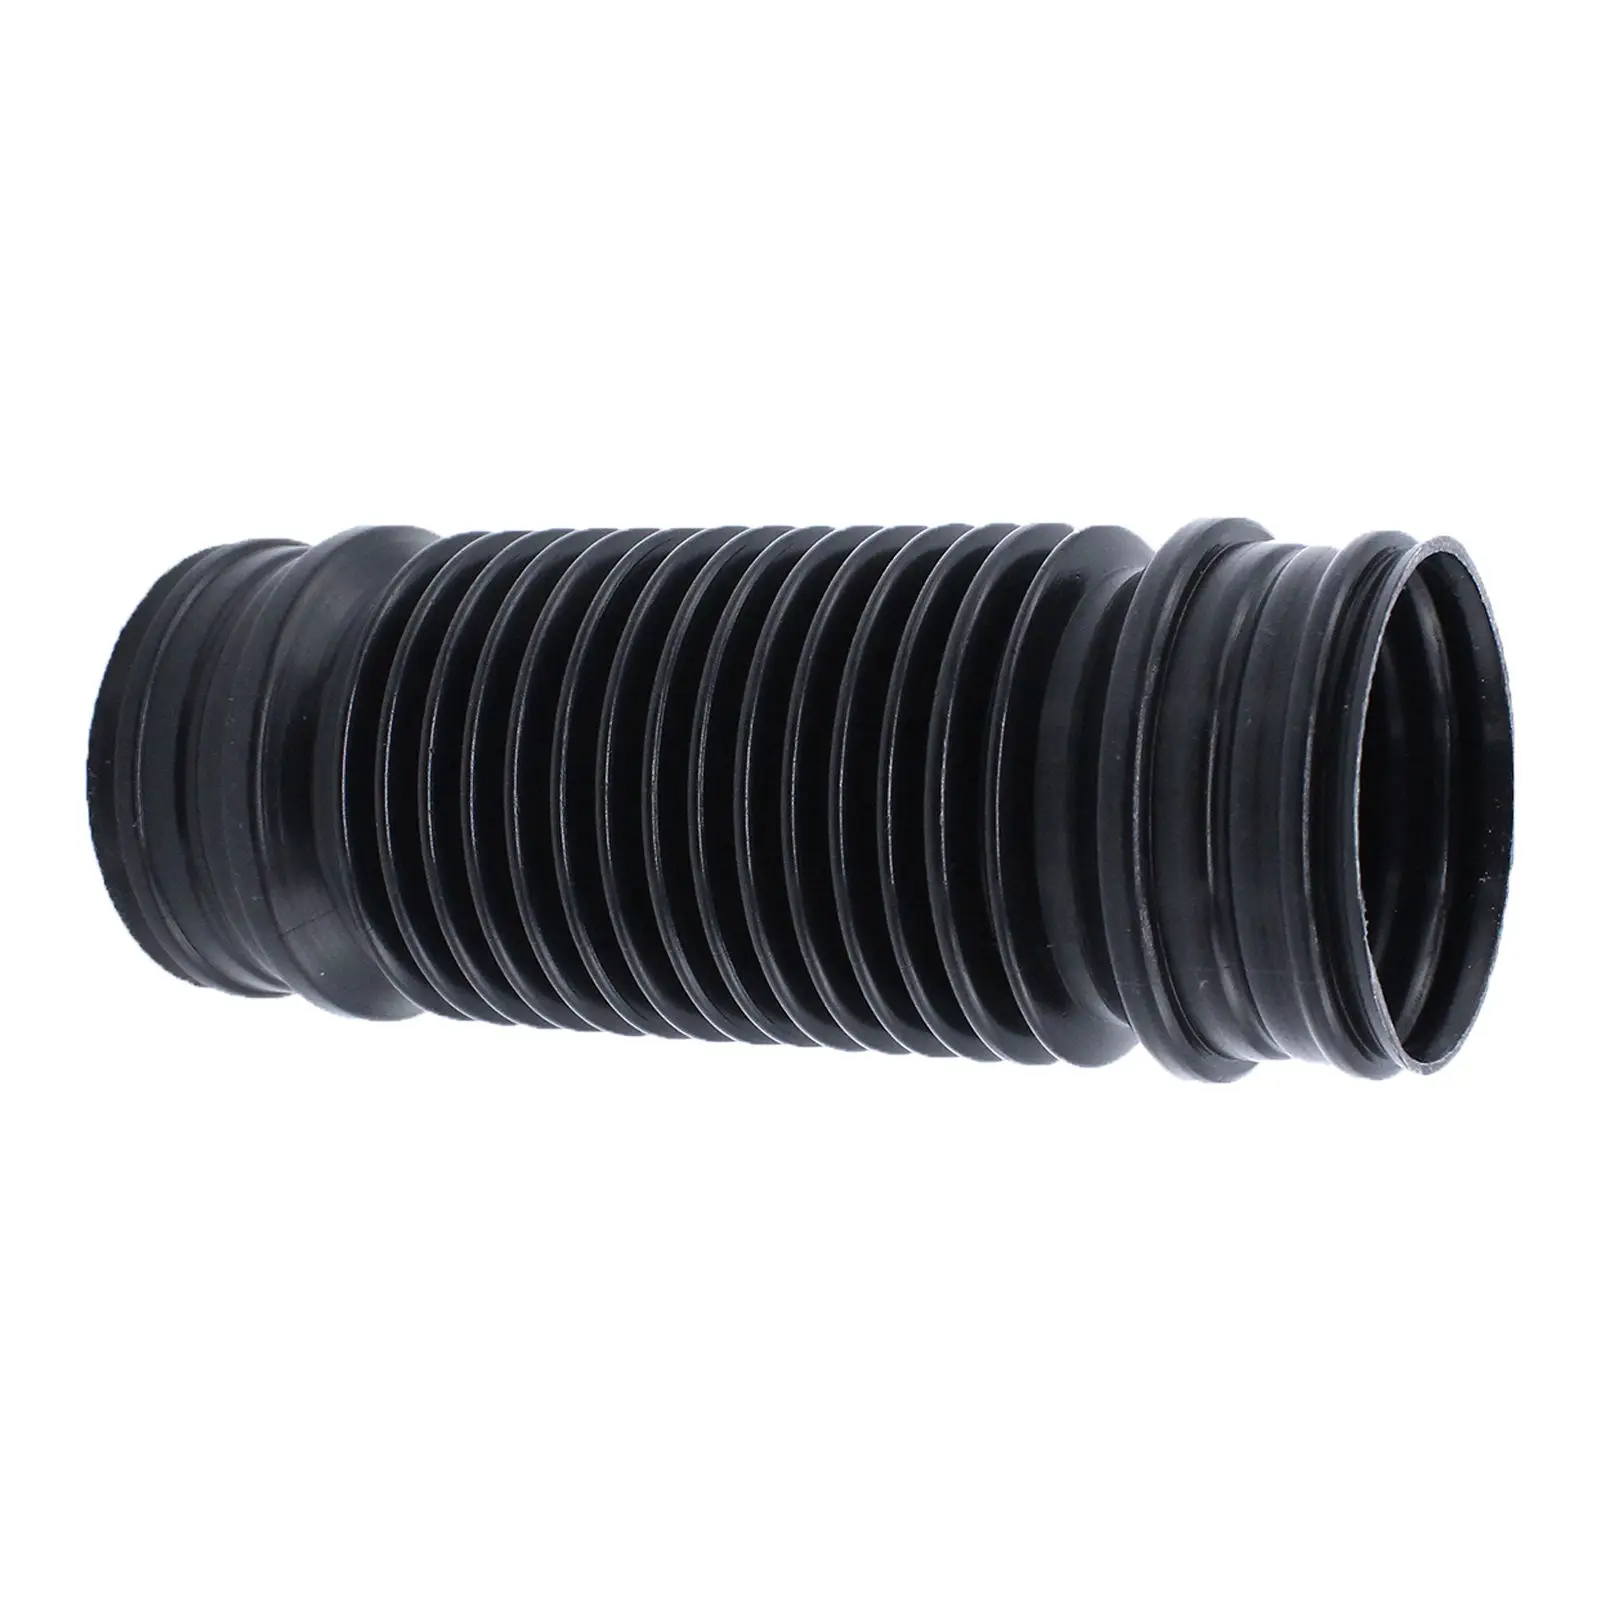 Intake Control Air Hose Pipe for VW Golf 98-06 Air Intake Tube Cleaner Hose Replacement Acc